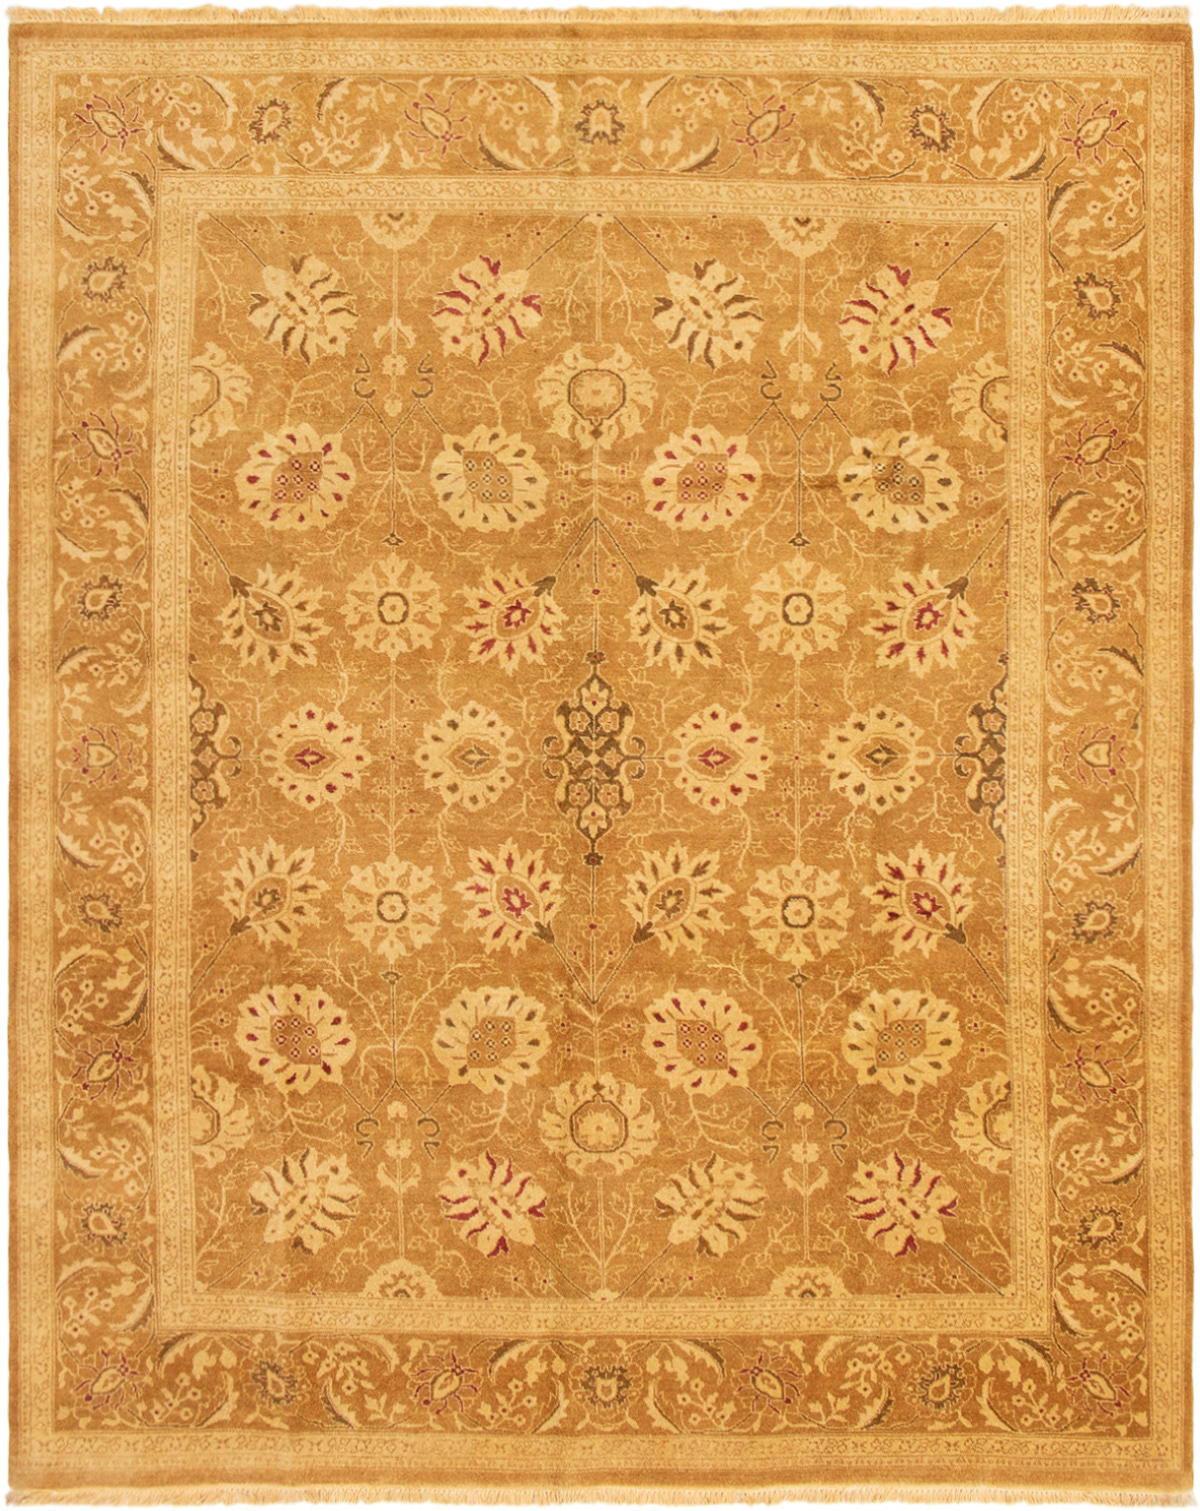 Hand-knotted Peshawar Oushak Light Brown Wool Rug 8'1" x 9'10" Size: 8'1" x 9'10"  